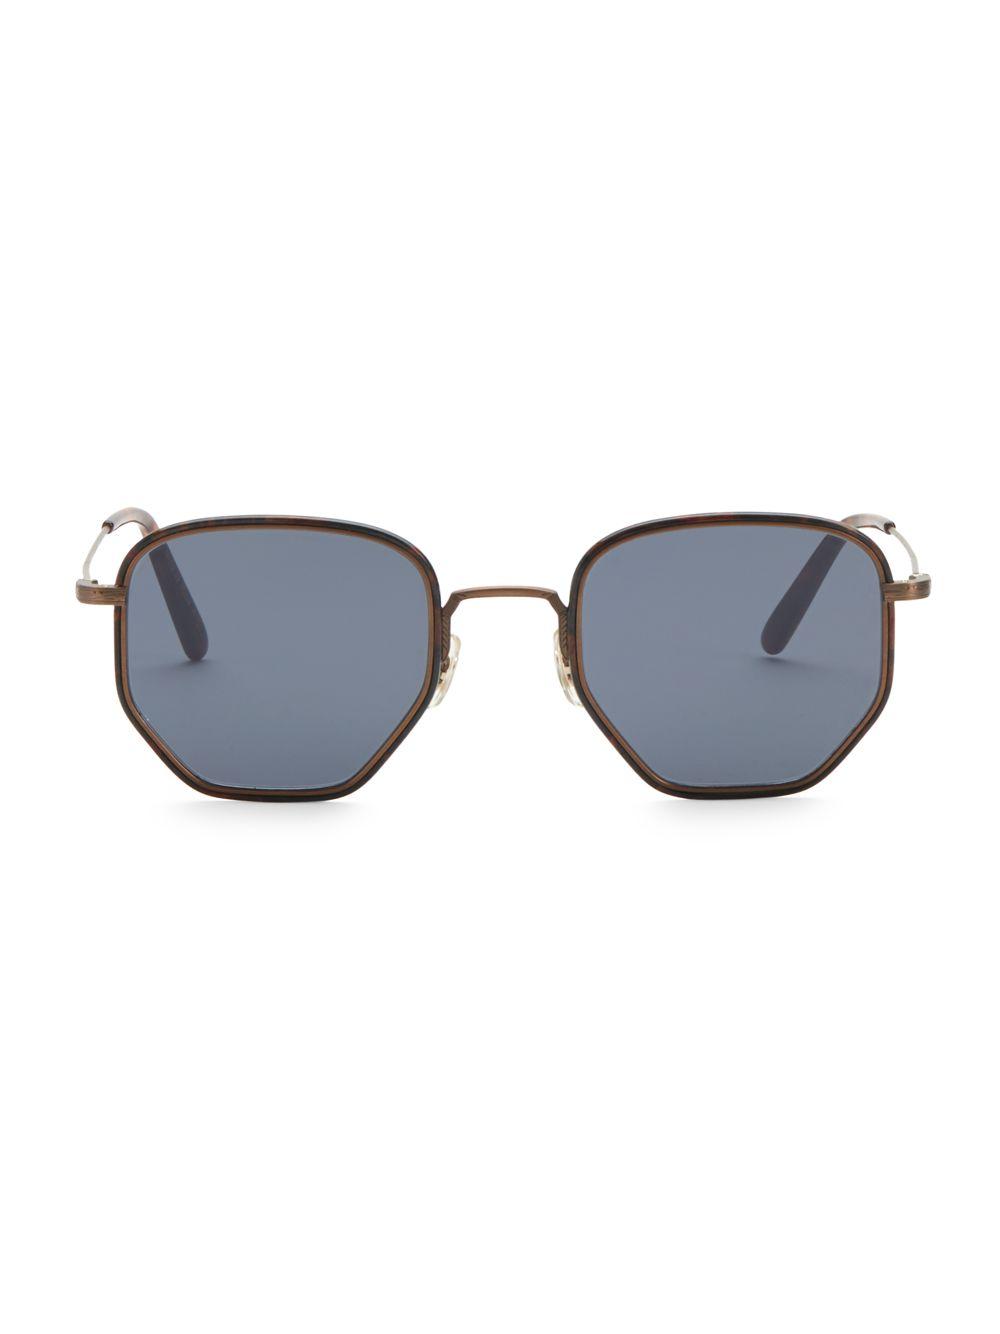 Oliver Peoples Alland 50mm Hexagon Sunglasses in Brown Tortoise (Brown ...